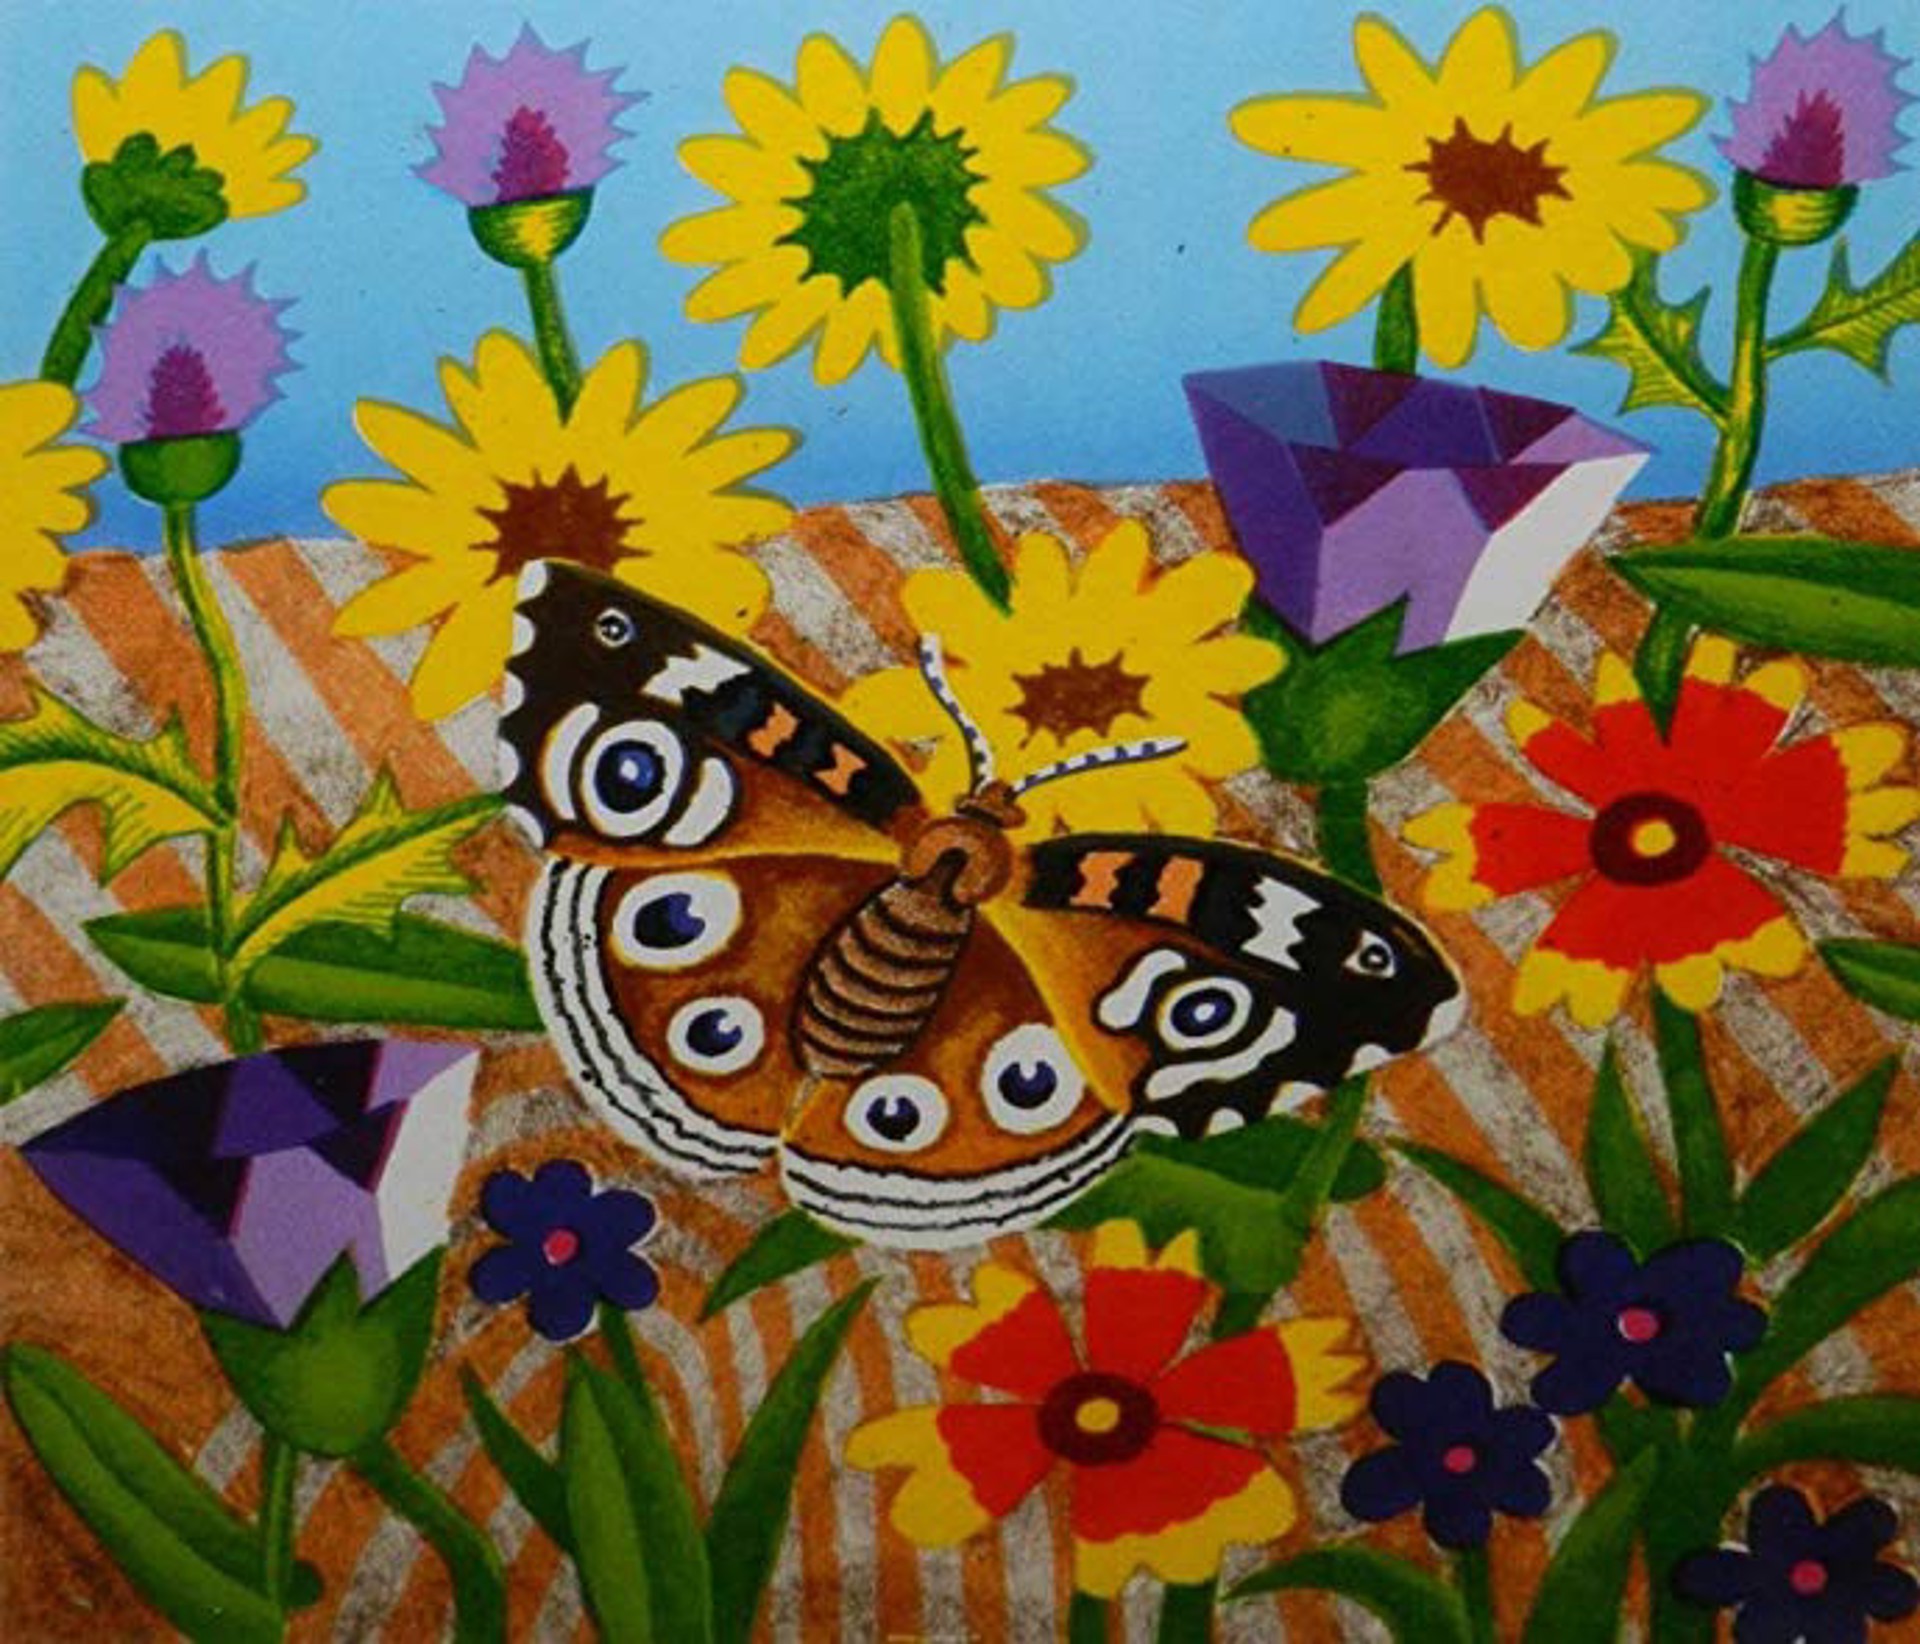 Buckeye Butterfly and Wildflowers by Billy Hassell